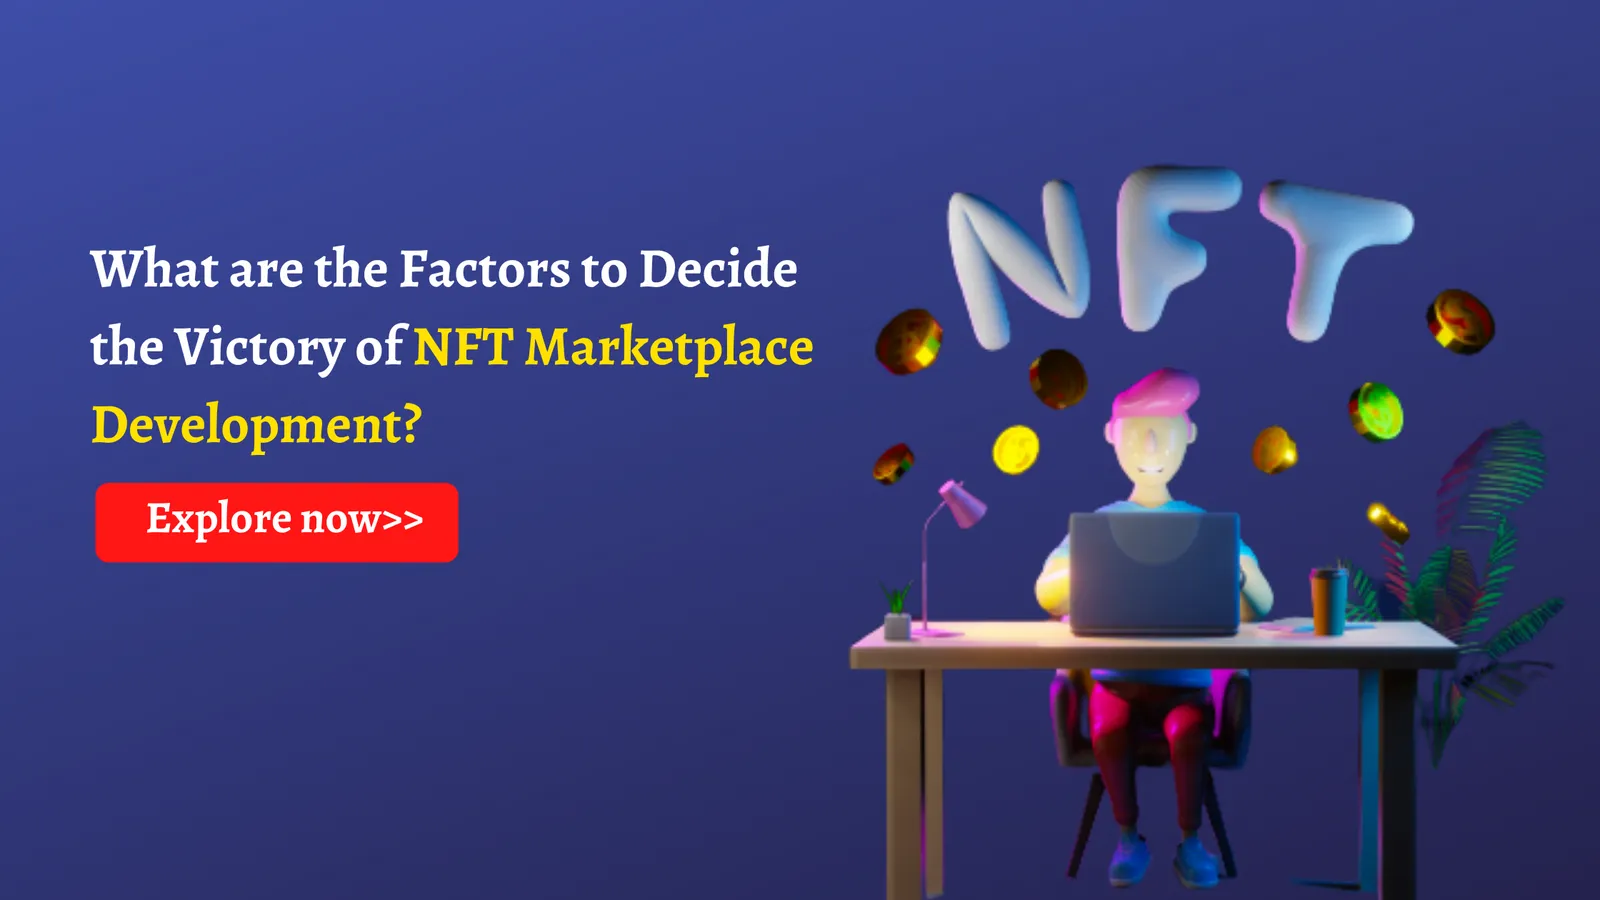 Important Factors to Decide the Victory of NFT Marketplace Development